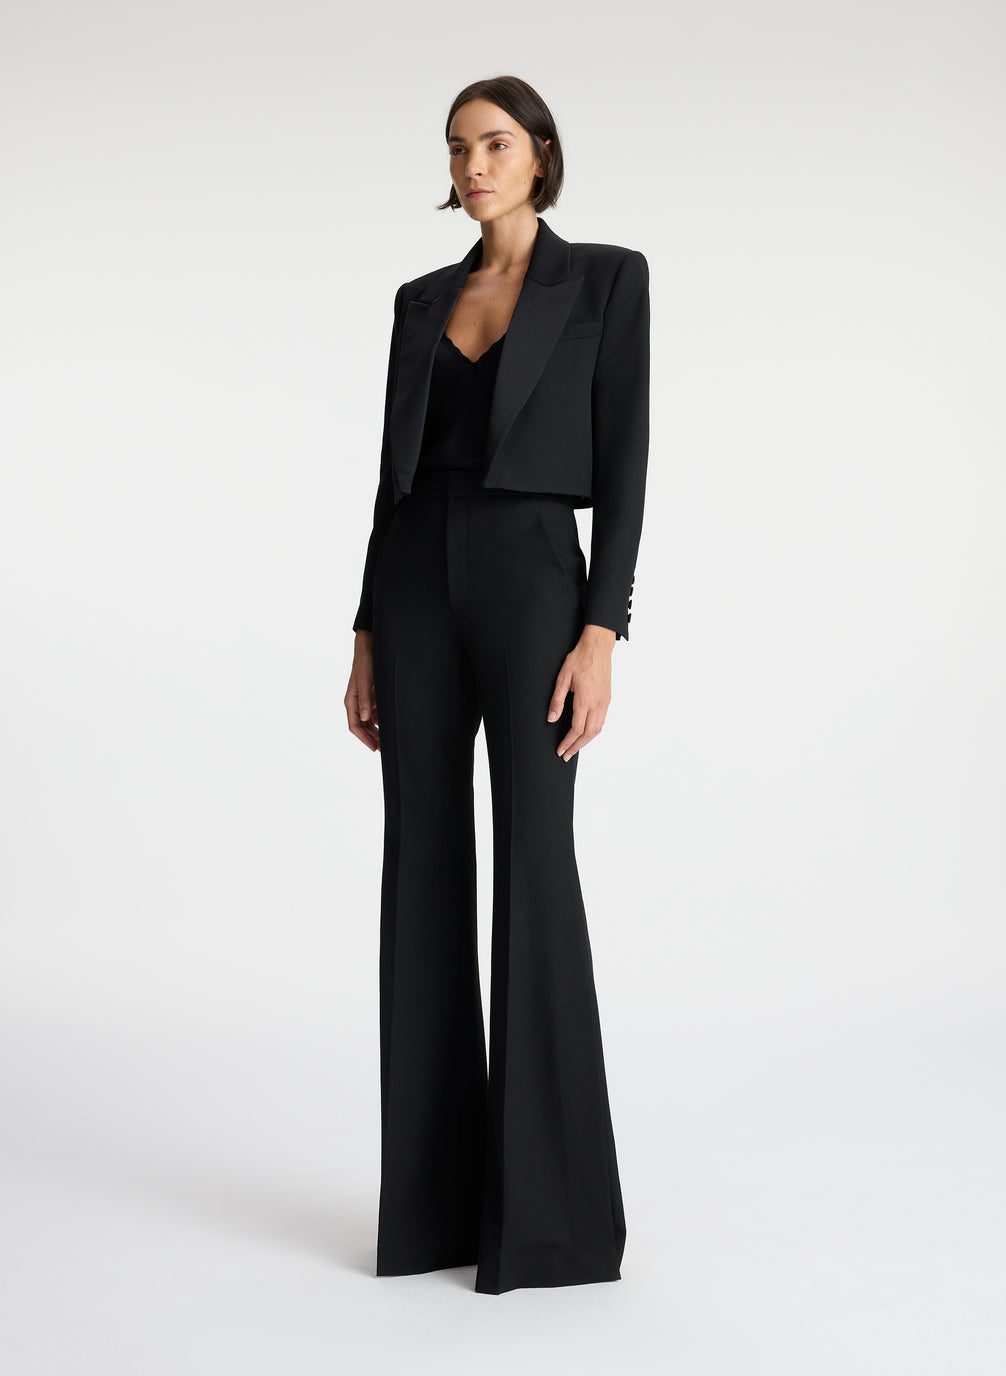 30 Latest Stunning Trendy Pant Designs For Suits Fashion, 43% OFF